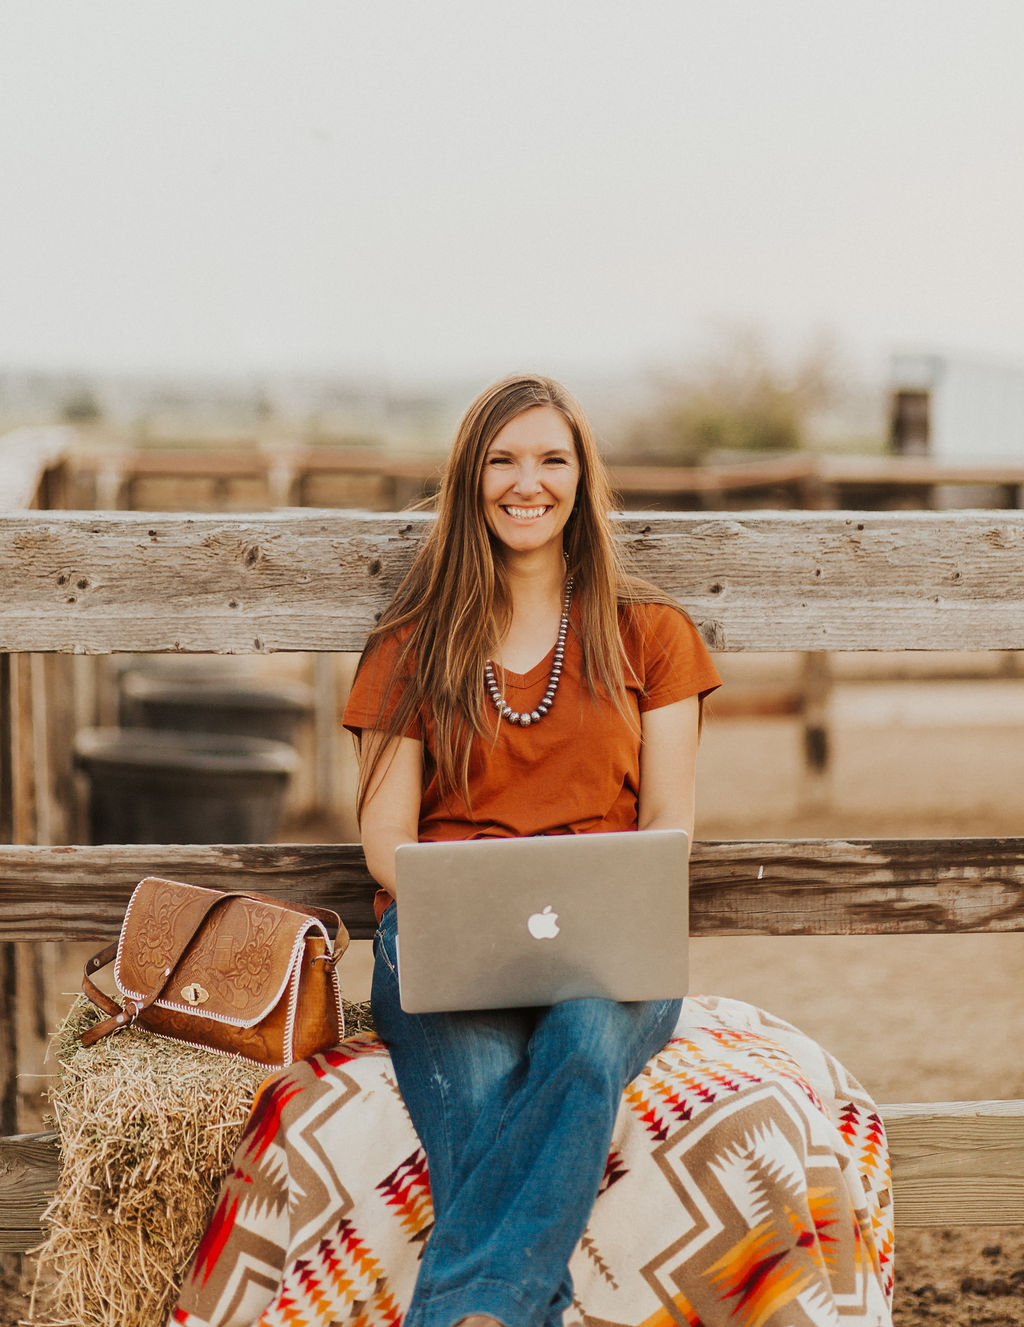 Woman with long dark blonde hair sitting on a hay bale and pendleton blanket with a laptop